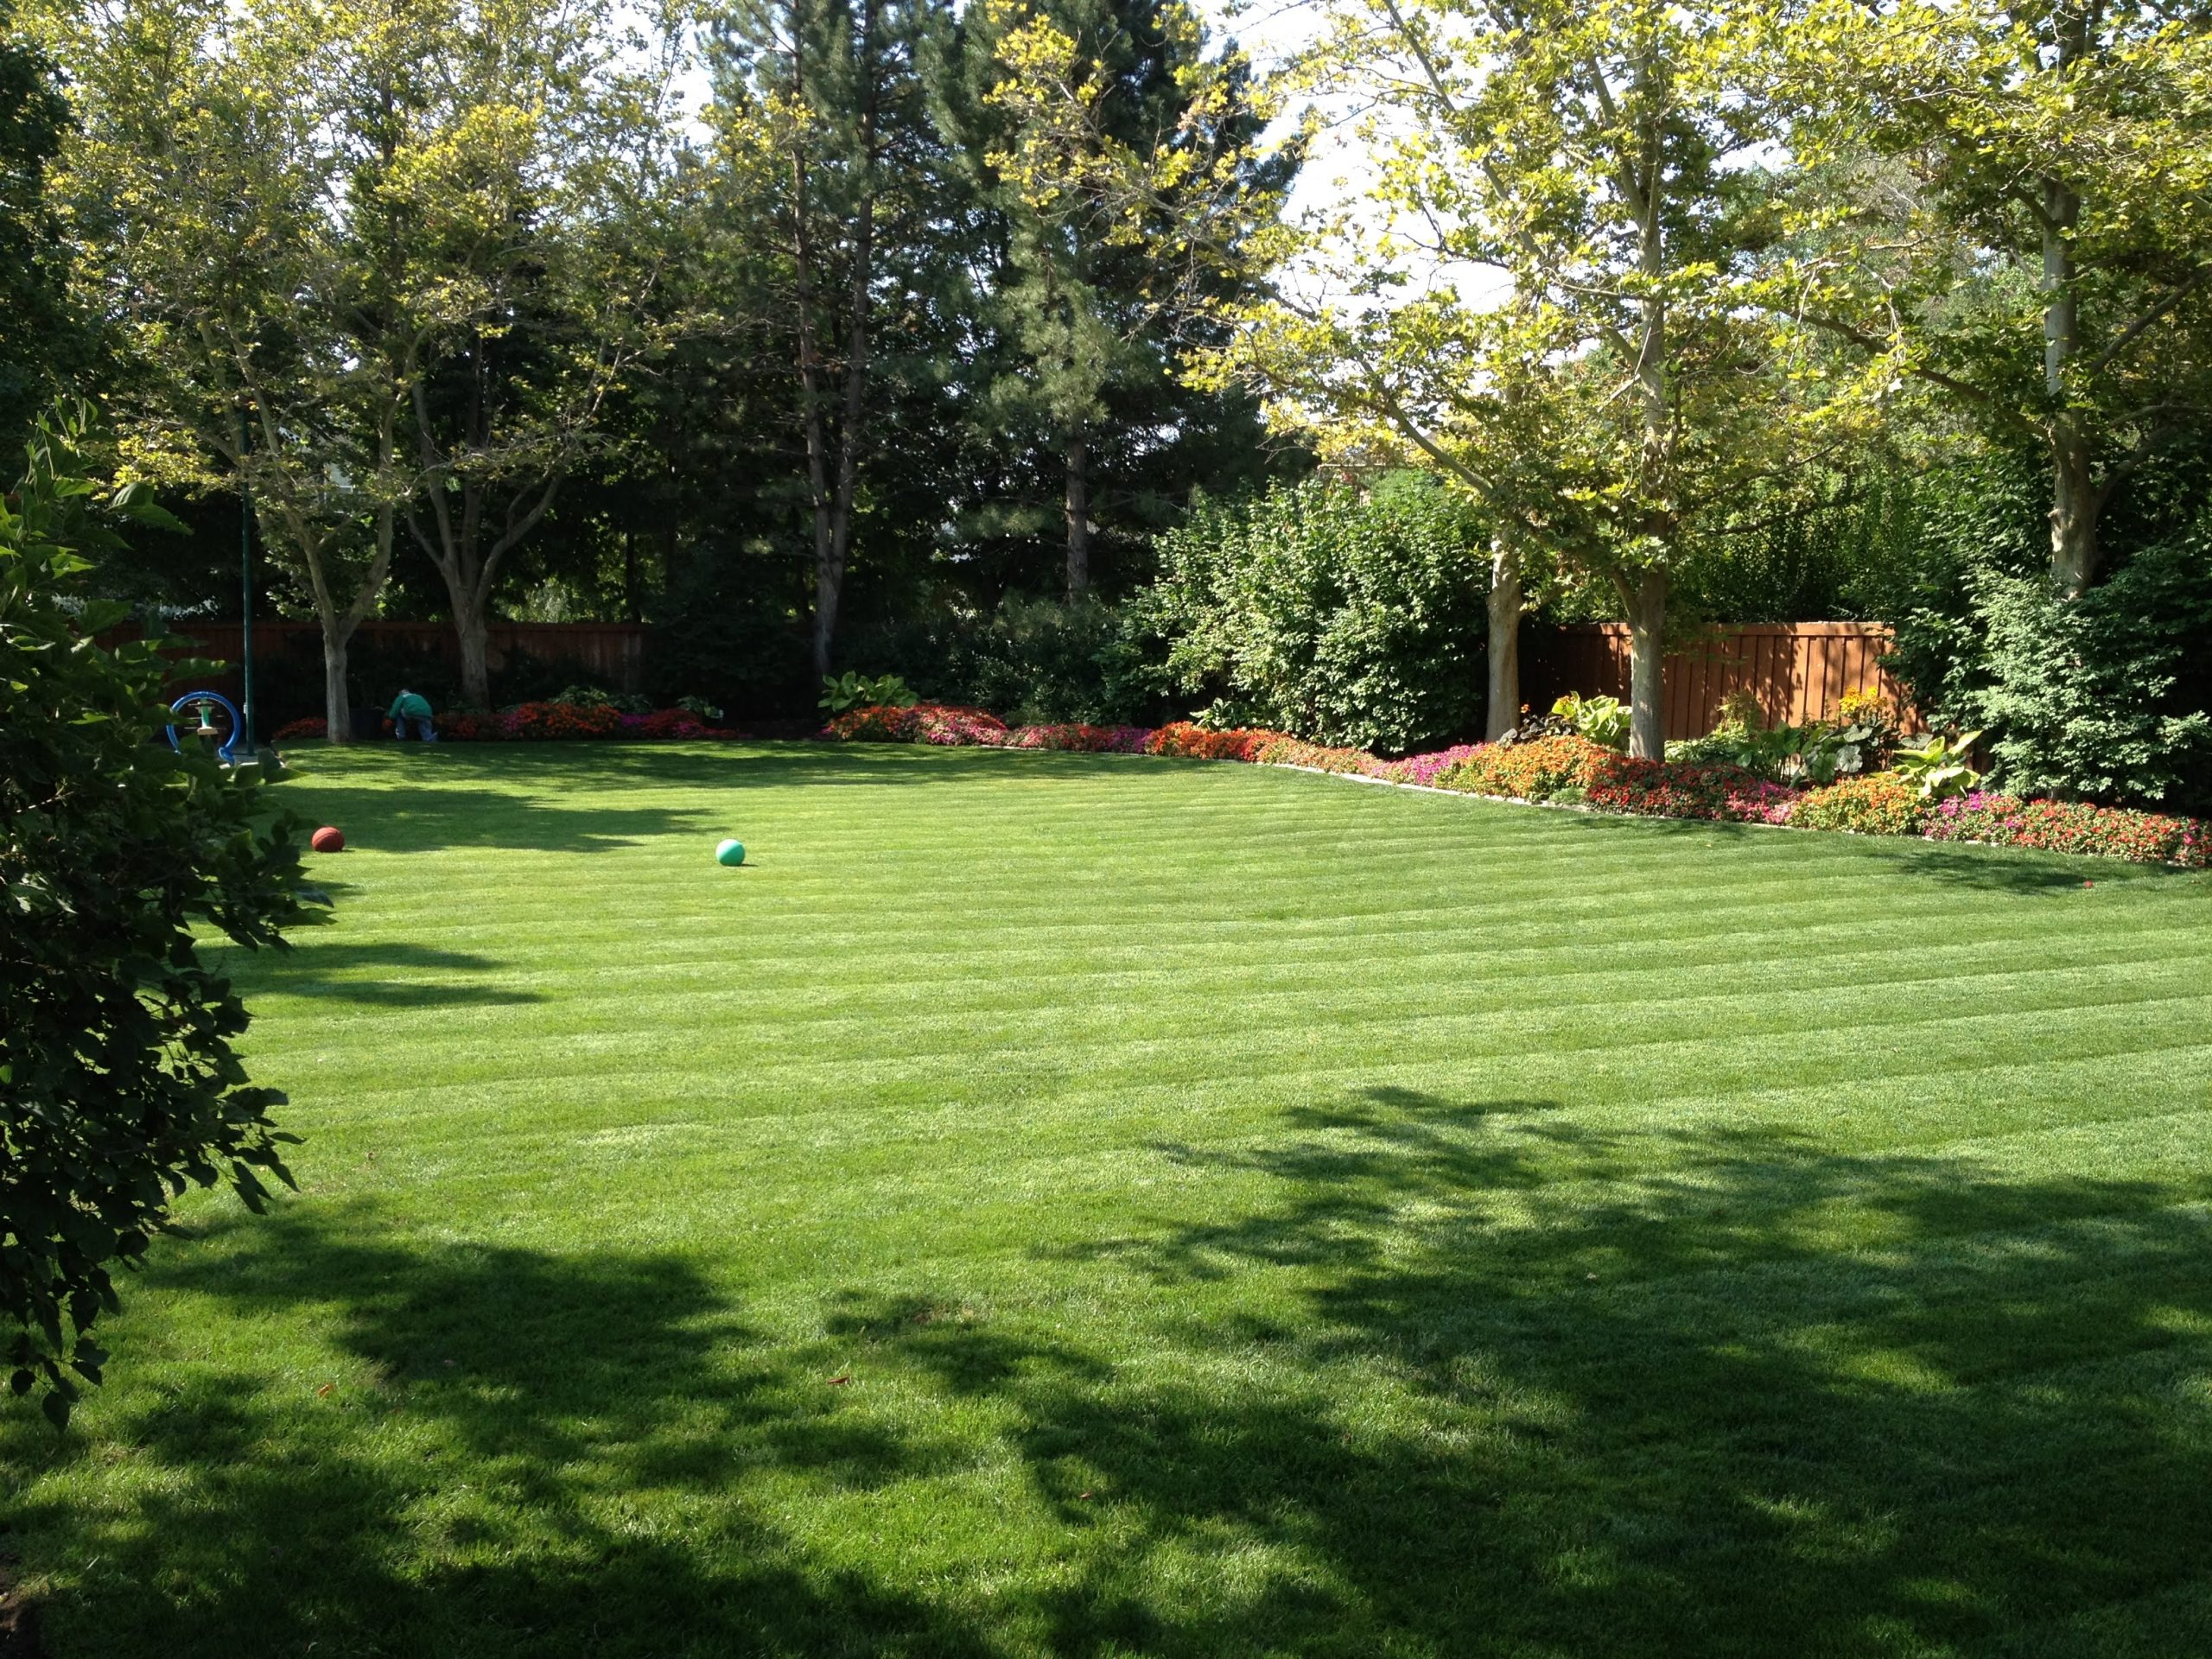 Thinking about starting a backyard landscaping project? From backyard landscaping costs to landscape timelines and our best tips on how to make the process run smoothly from beginning to end, here are your top backyard landscaping questions answered!